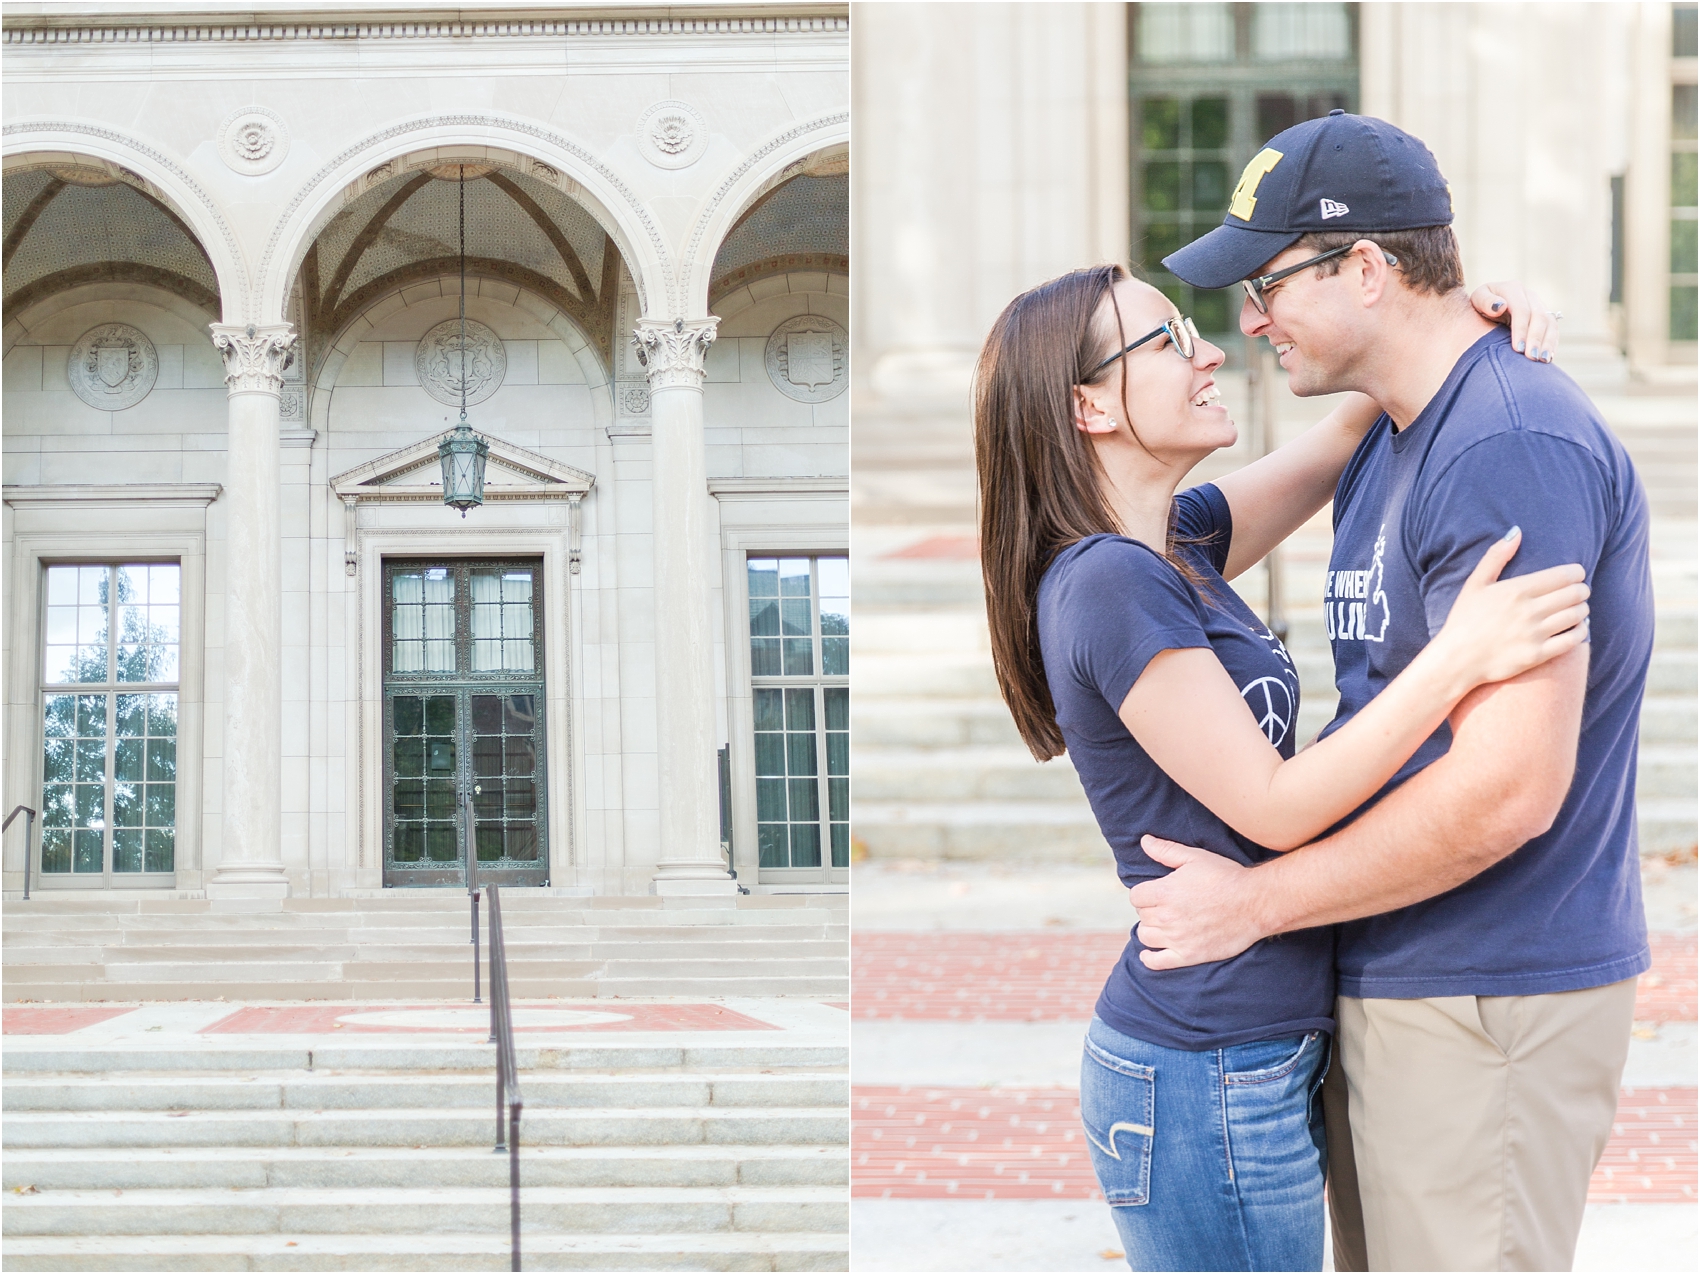 classic-fall-engagement-photos-at-the-university-of-michigan-in-ann-arbor-mi-by-courtney-carolyn-photography_0012.jpg